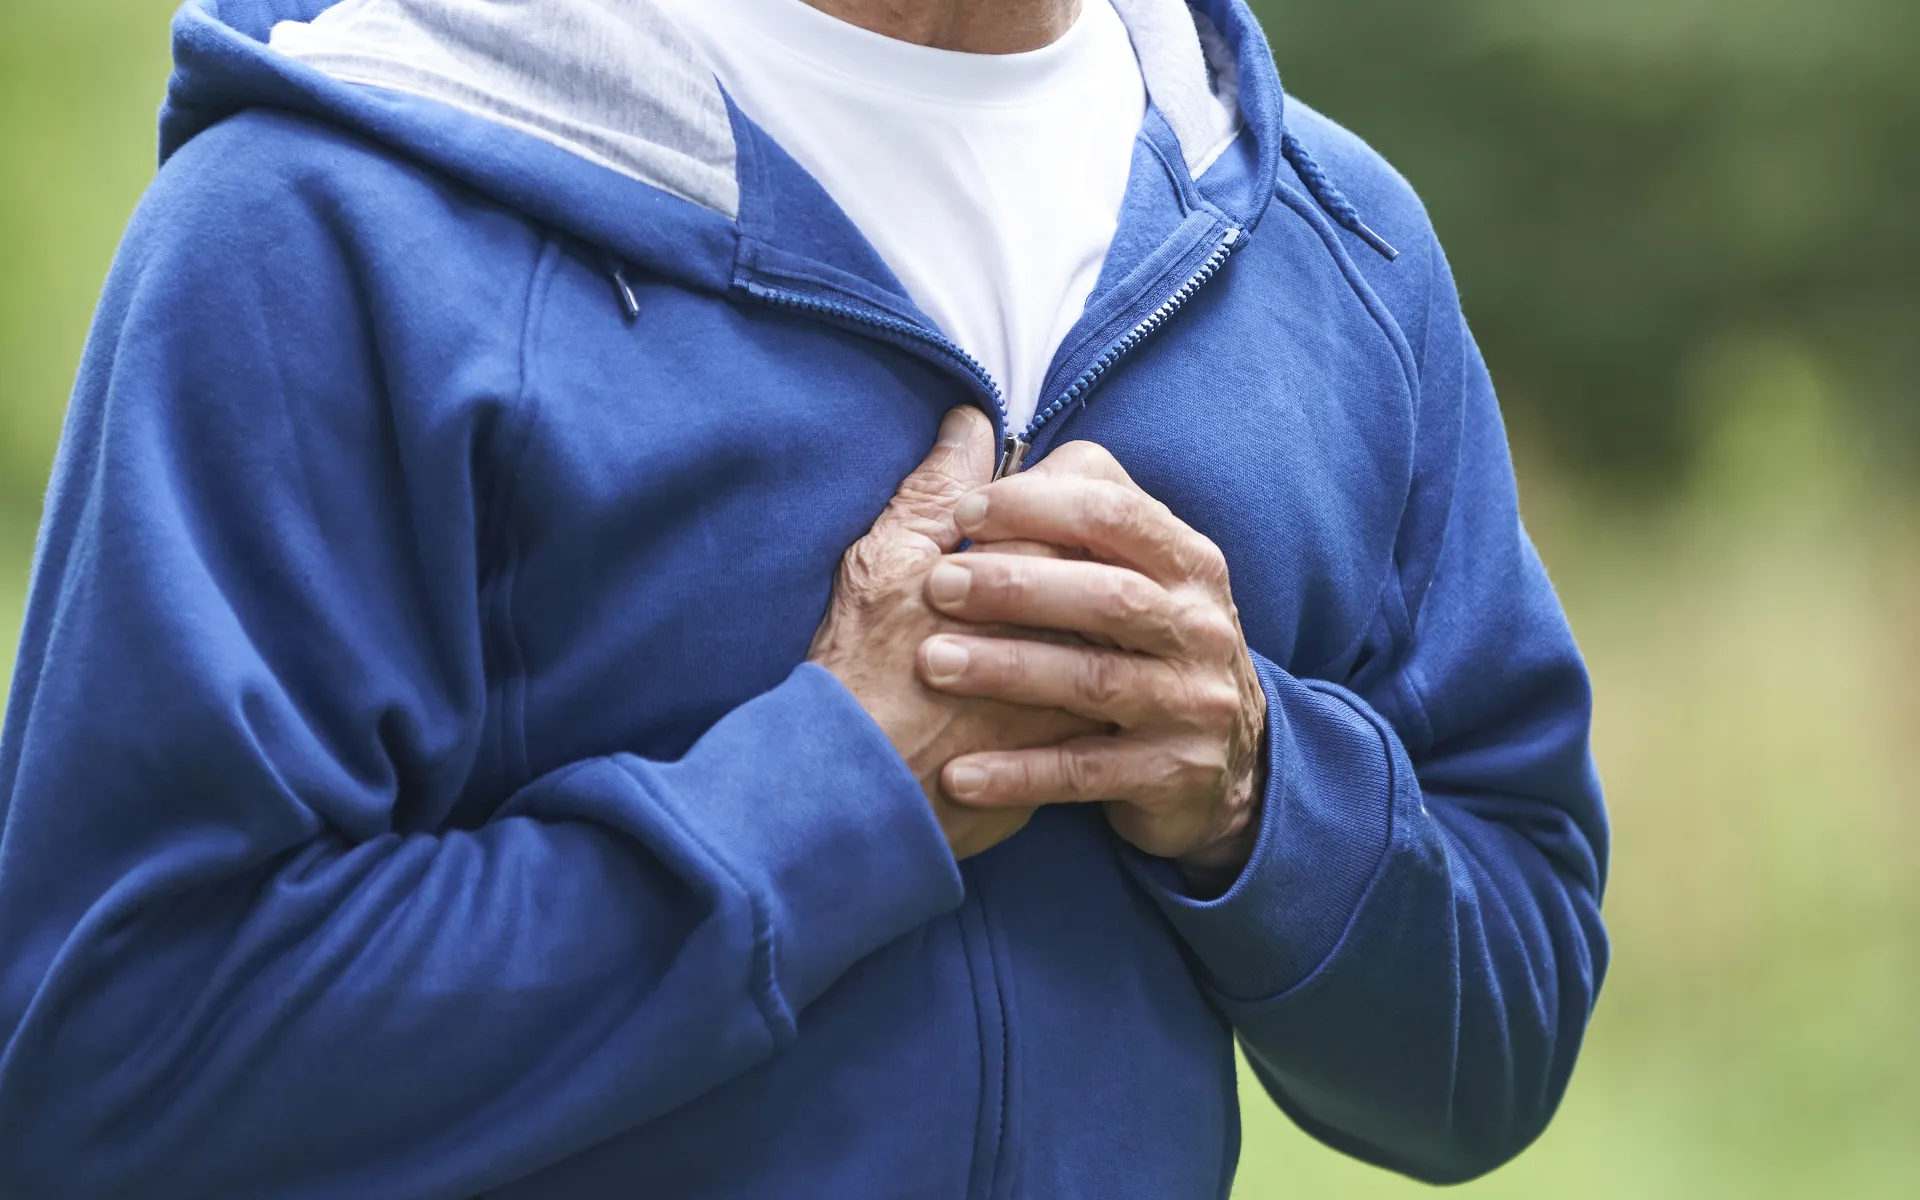 10 Critical Signs of an Impending Heart Attack